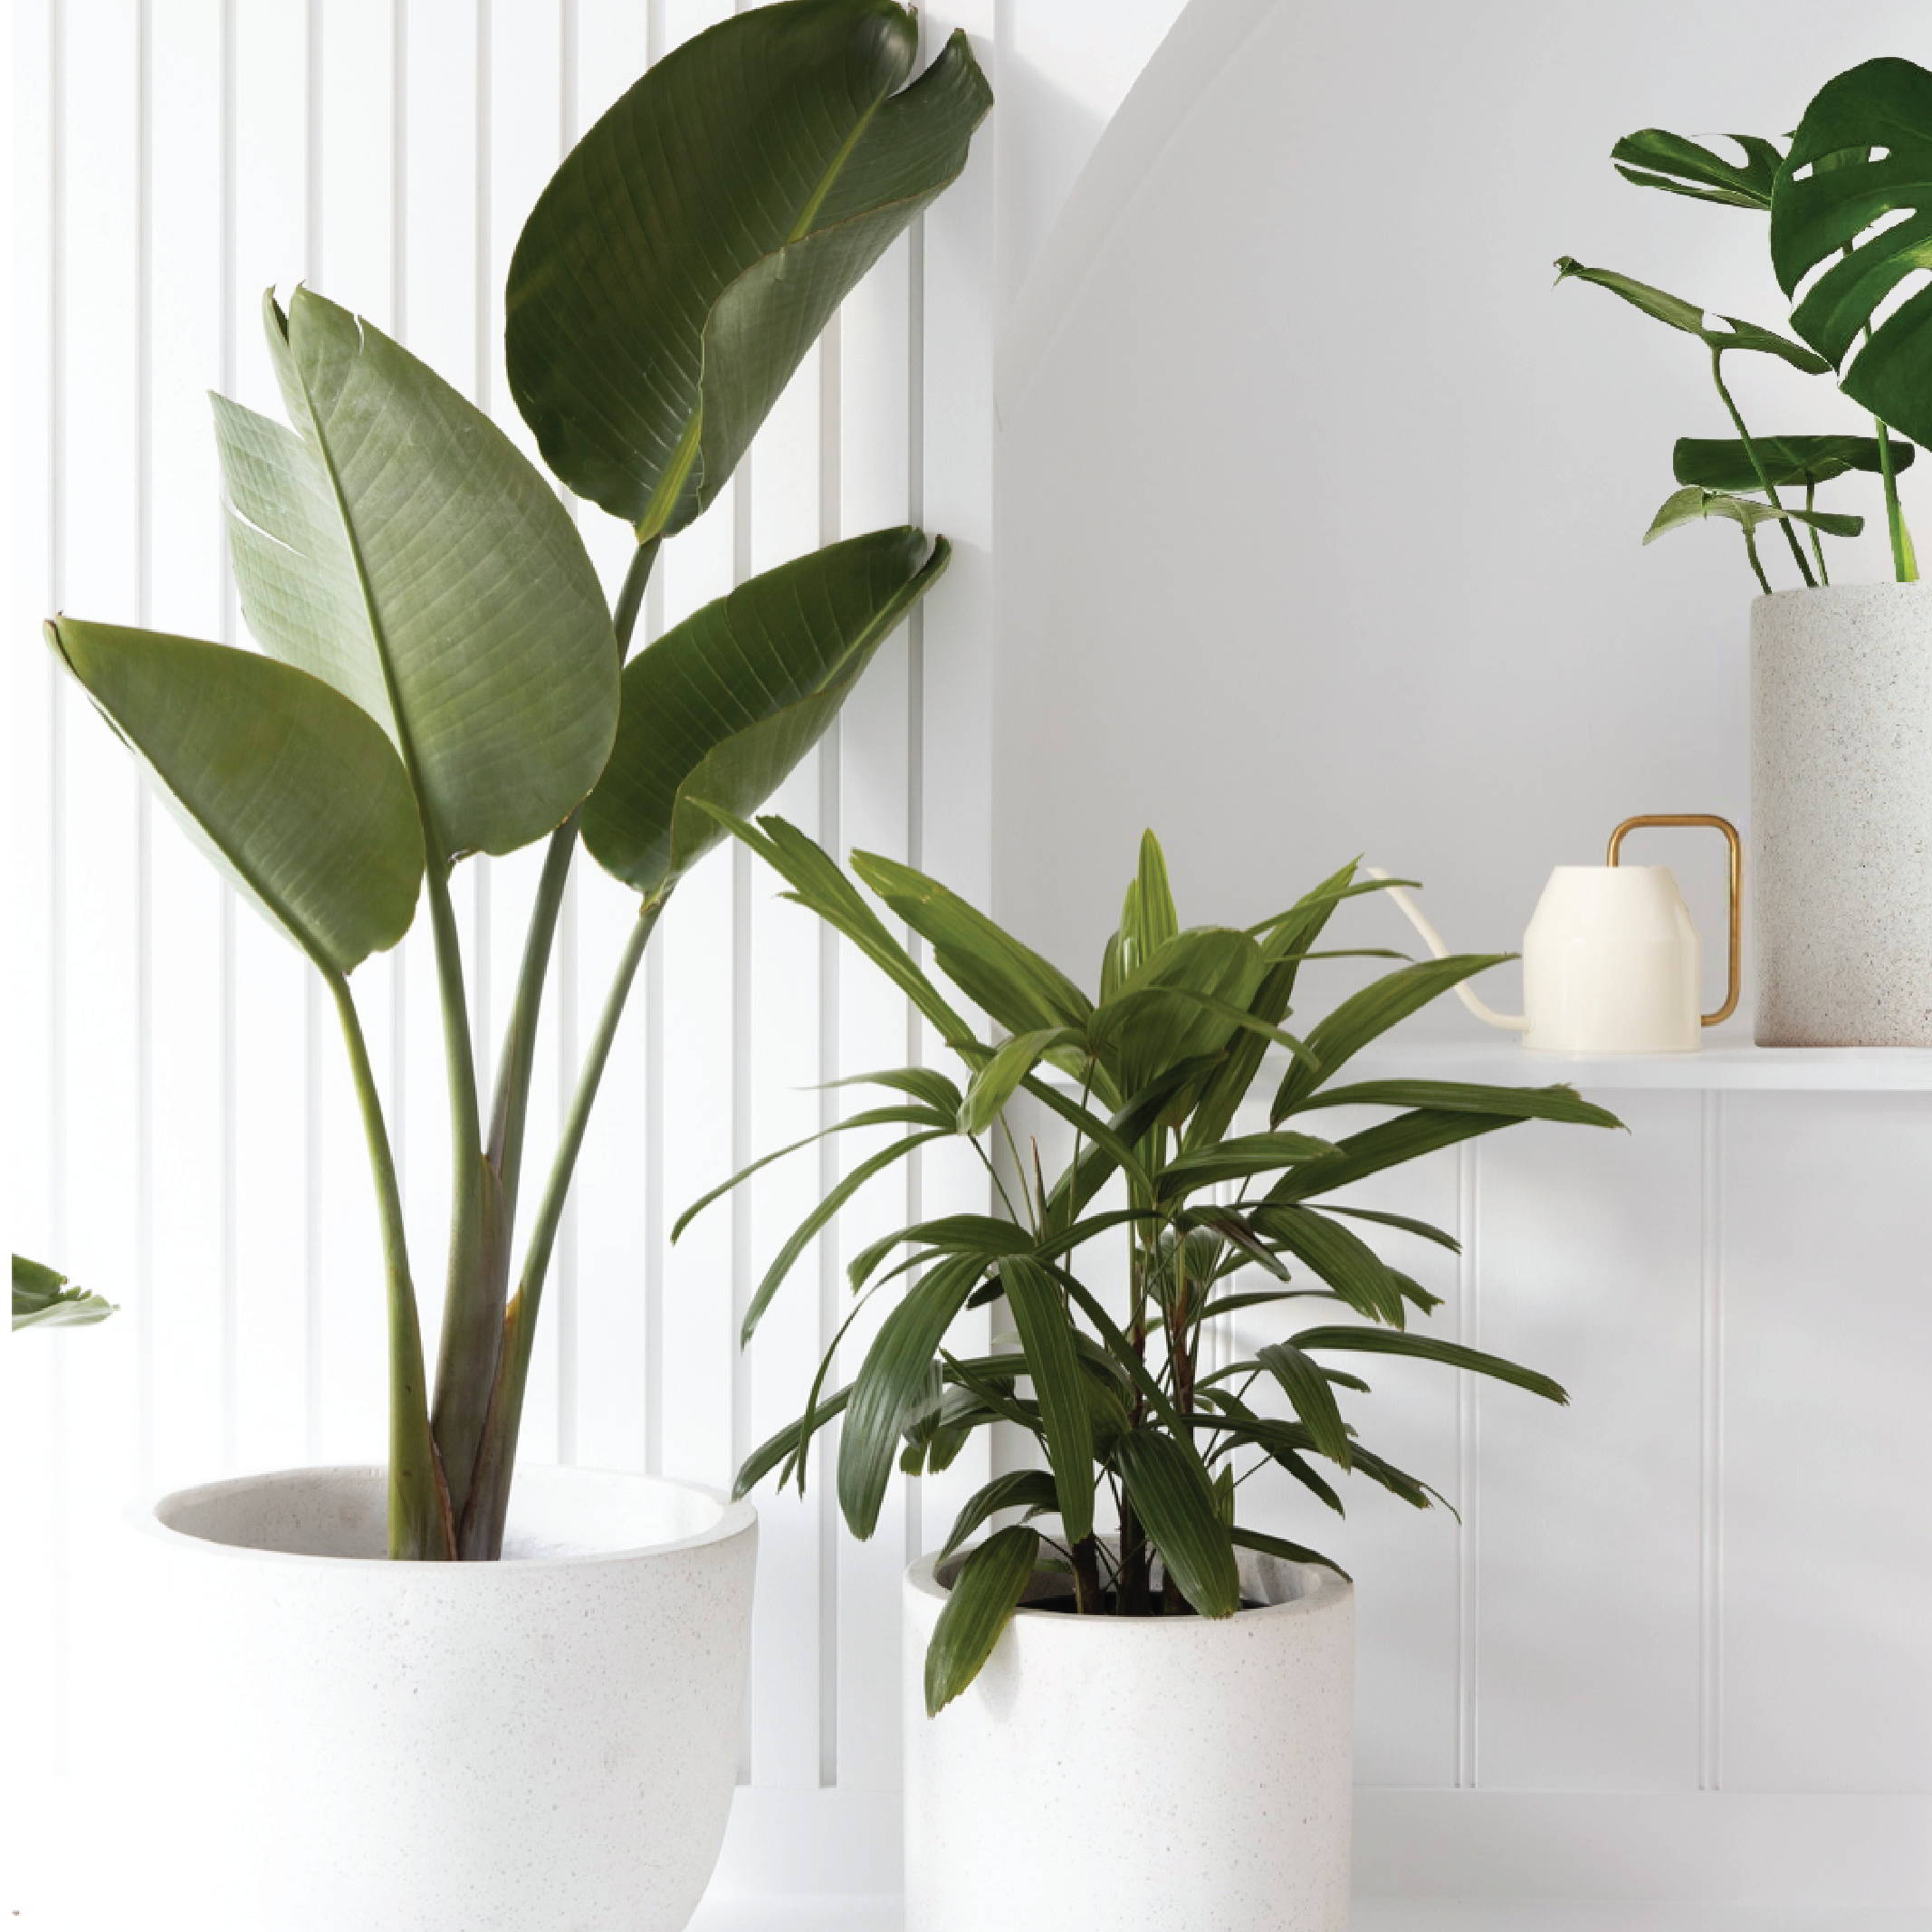 Living Room Plant Collection from The Good Plant Co